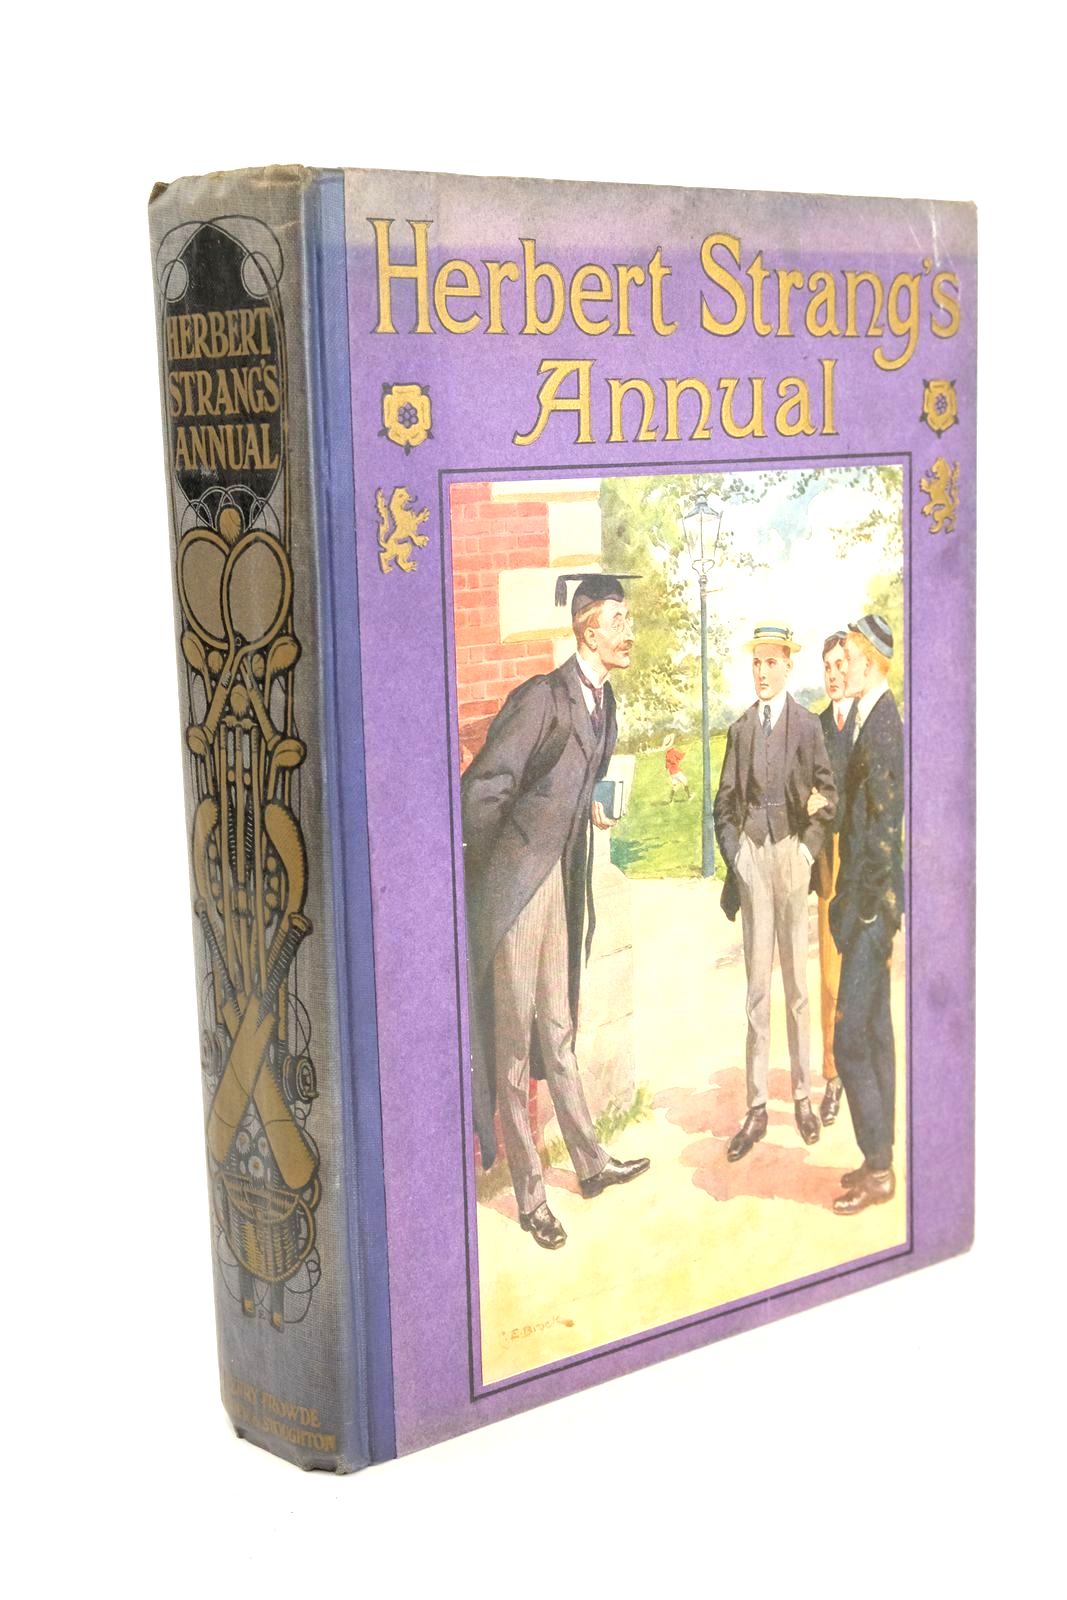 Photo of HERBERT STRANG'S ANNUAL 1912 written by Strang, Herbert Bone, David W. Blake, Stacey Gilson, Captain Charles Hayens, Herbert et al, illustrated by Cuneo, Cyrus Edwards, Lionel Brock, C.E. et al., published by Hodder &amp; Stoughton, Henry Frowde (STOCK CODE: 1325848)  for sale by Stella & Rose's Books